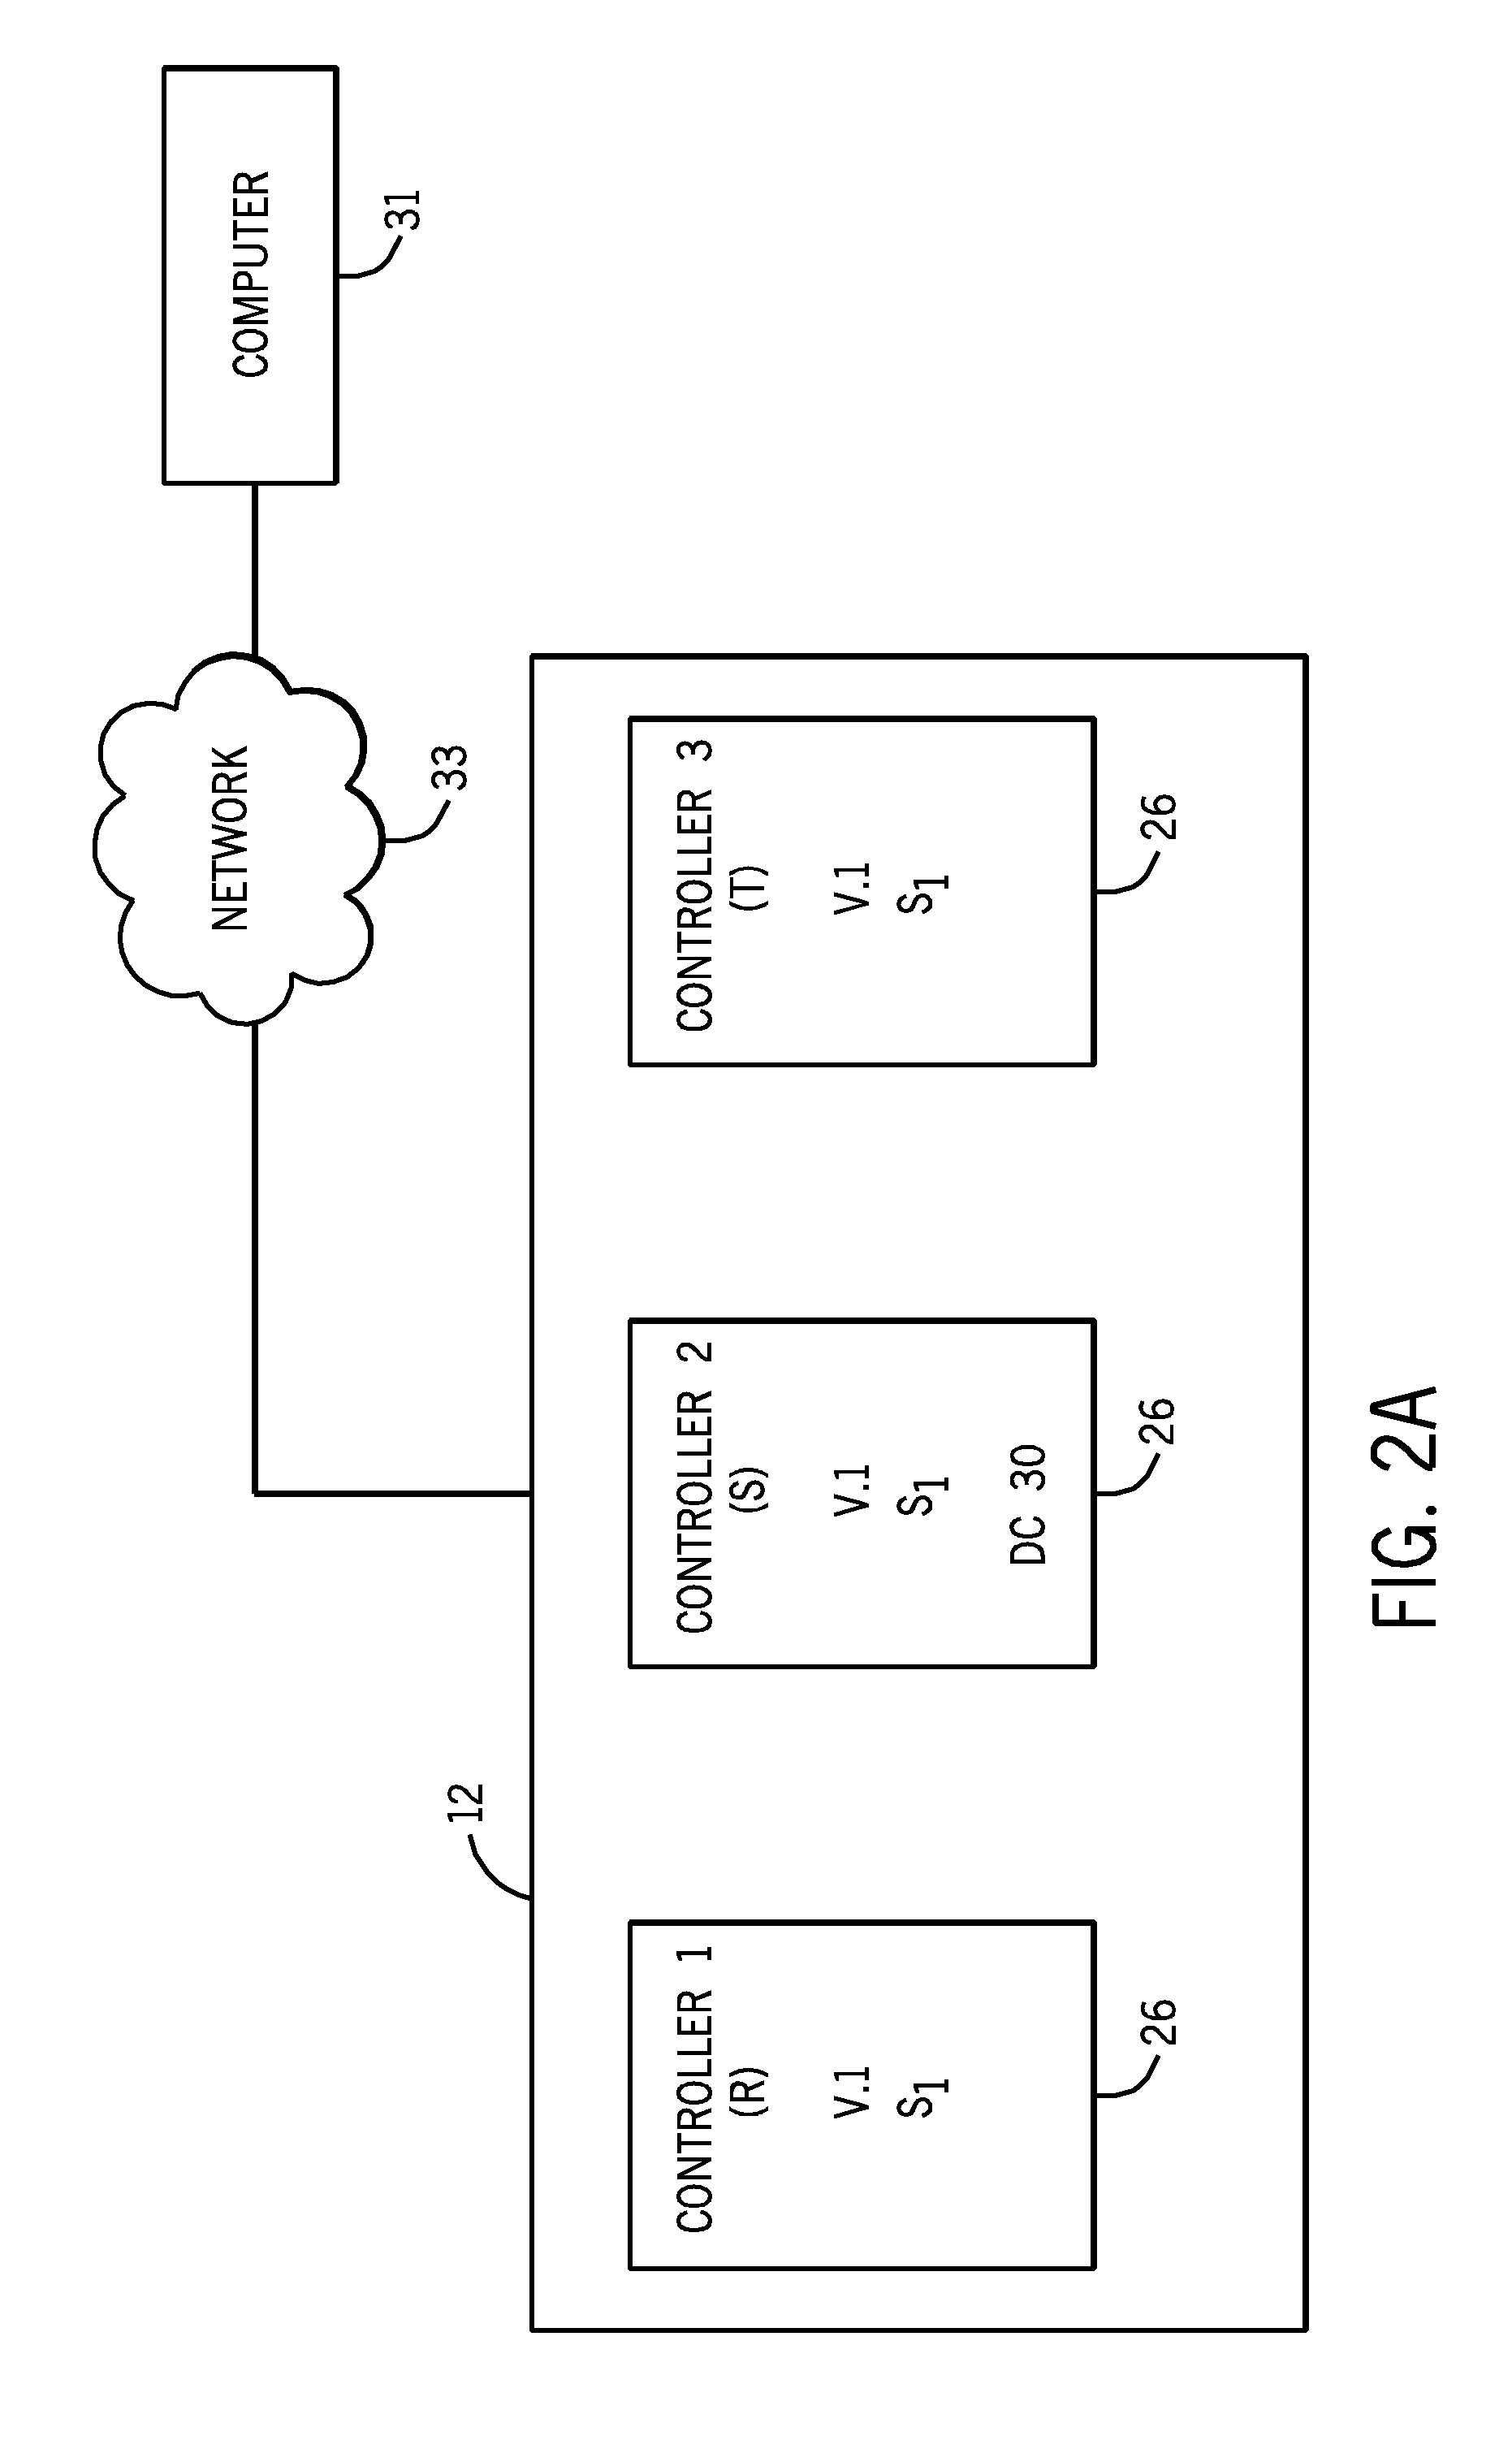 Method for download of sequential function charts to a triple module redundant control system